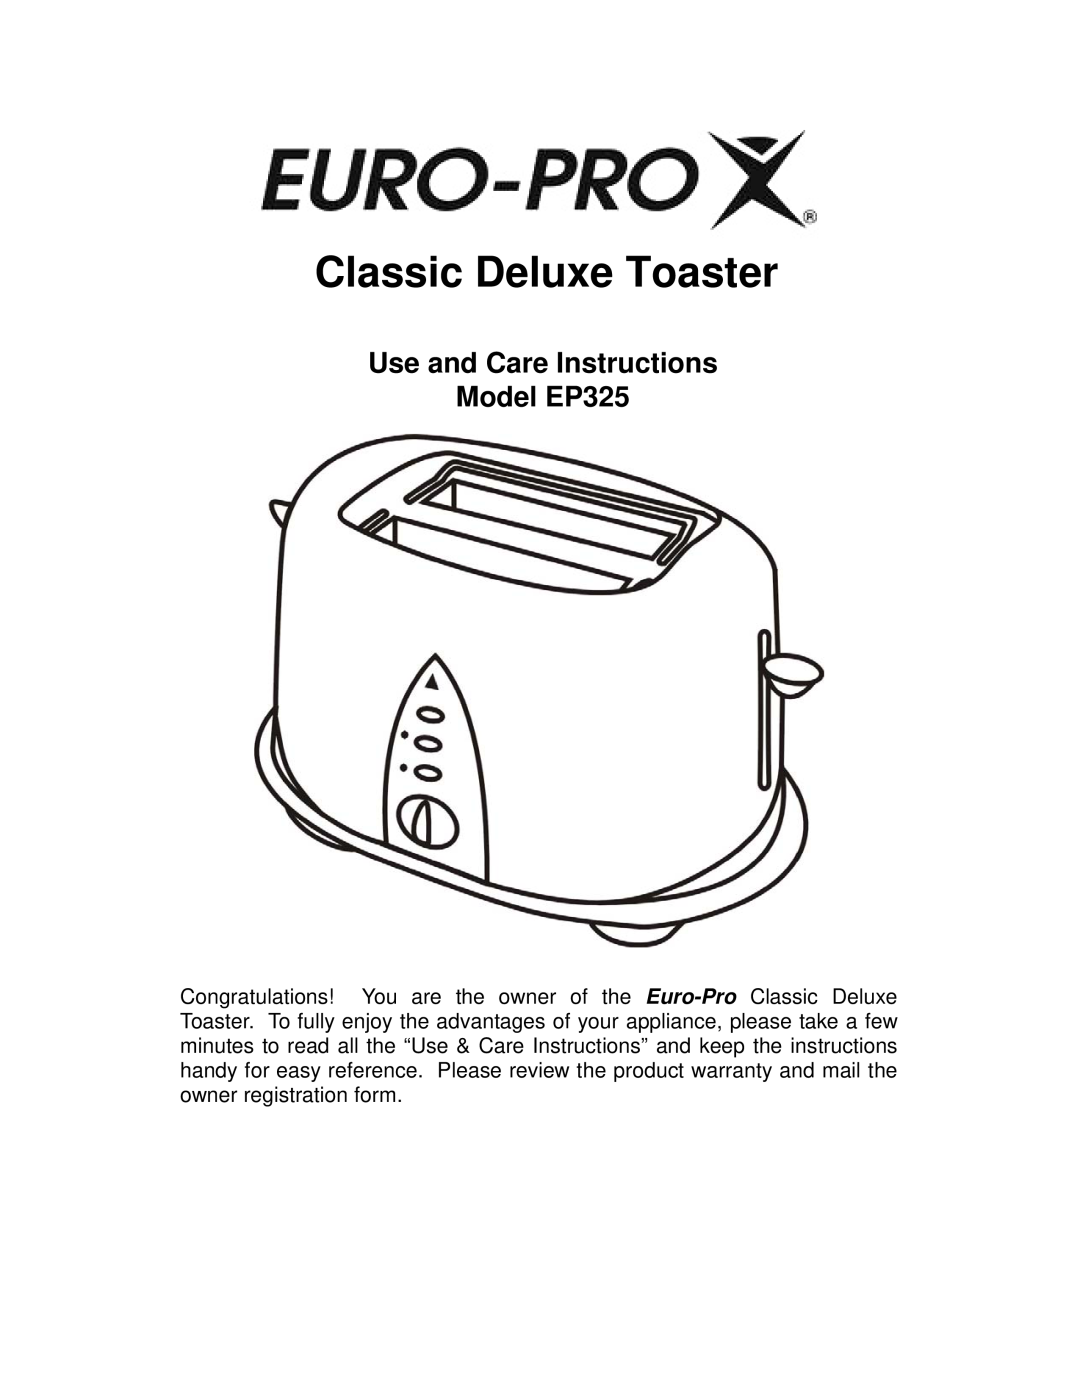 Euro-Pro warranty Classic Deluxe Toaster, Use and Care Instructions Model EP325 